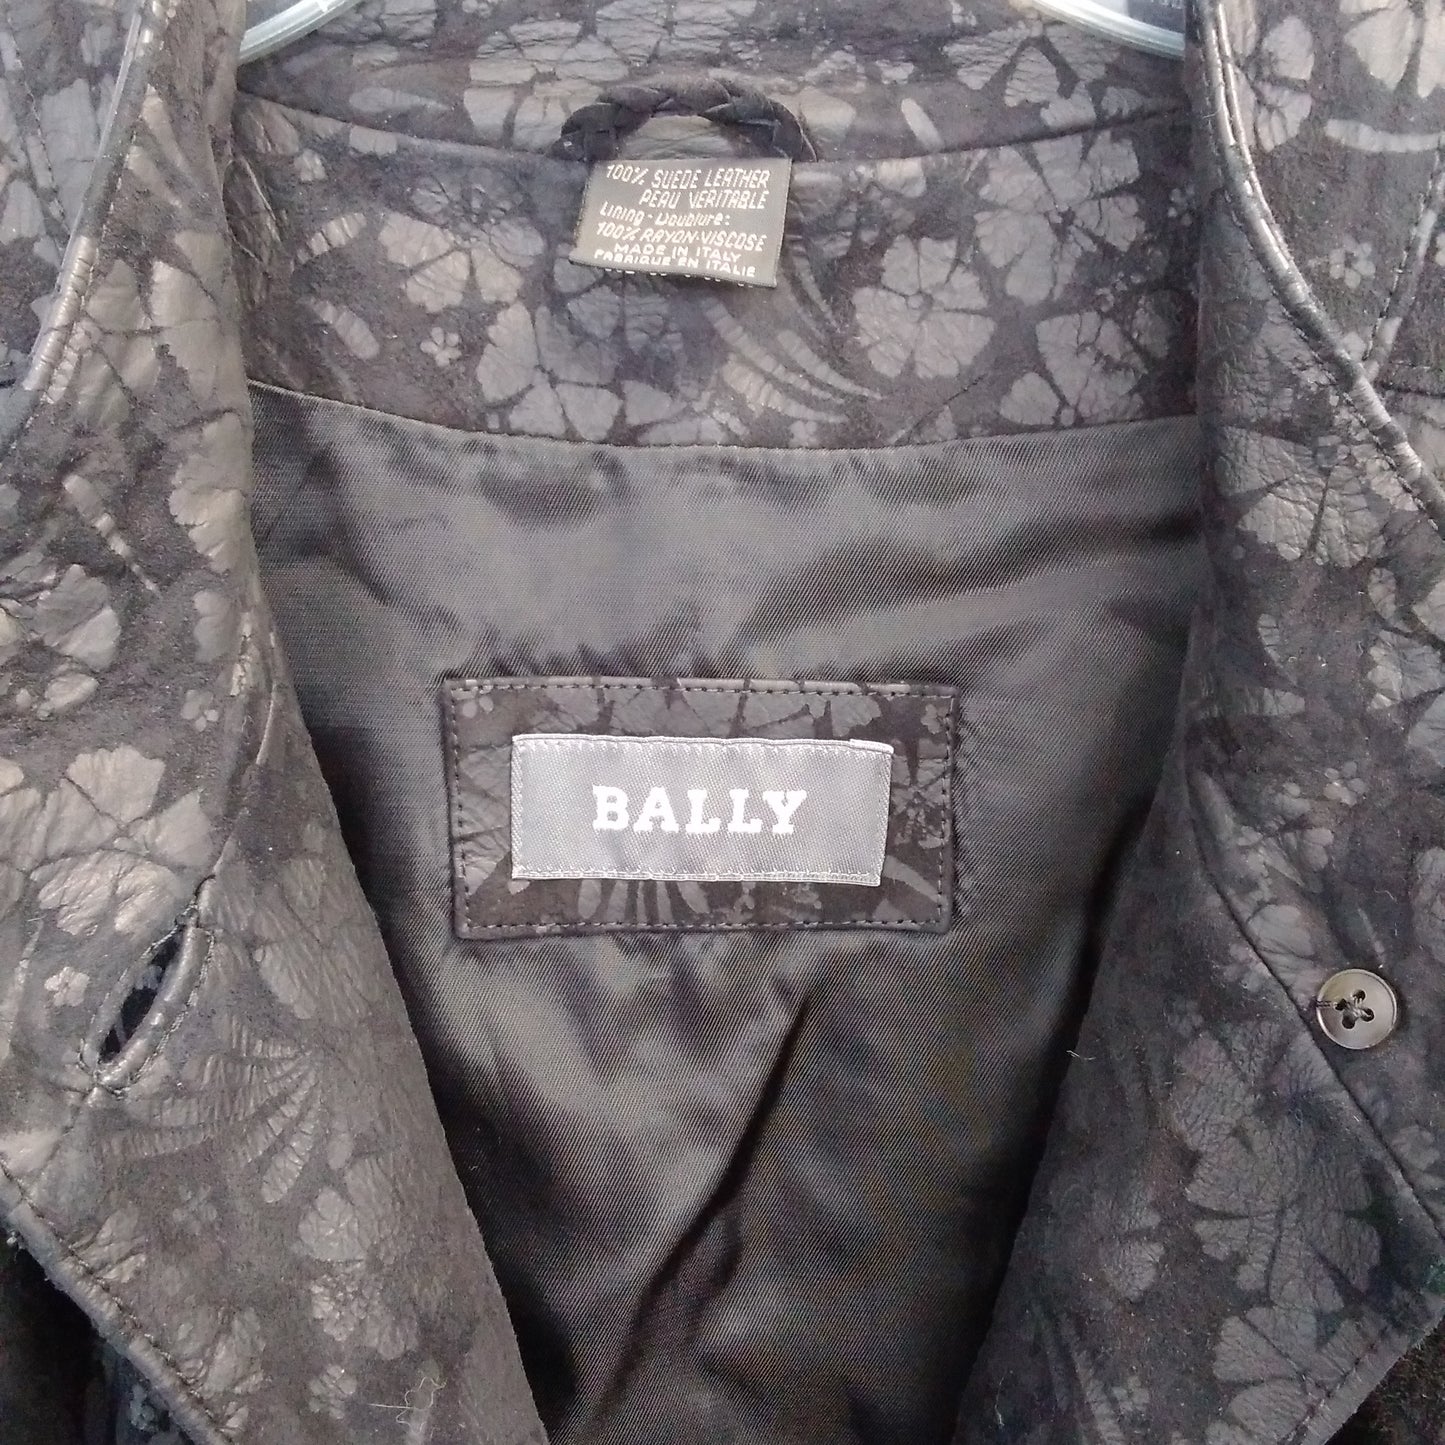 Bally Women's Black Suede Leather Floral Button Front Jacket - Size: 38 (US 6)